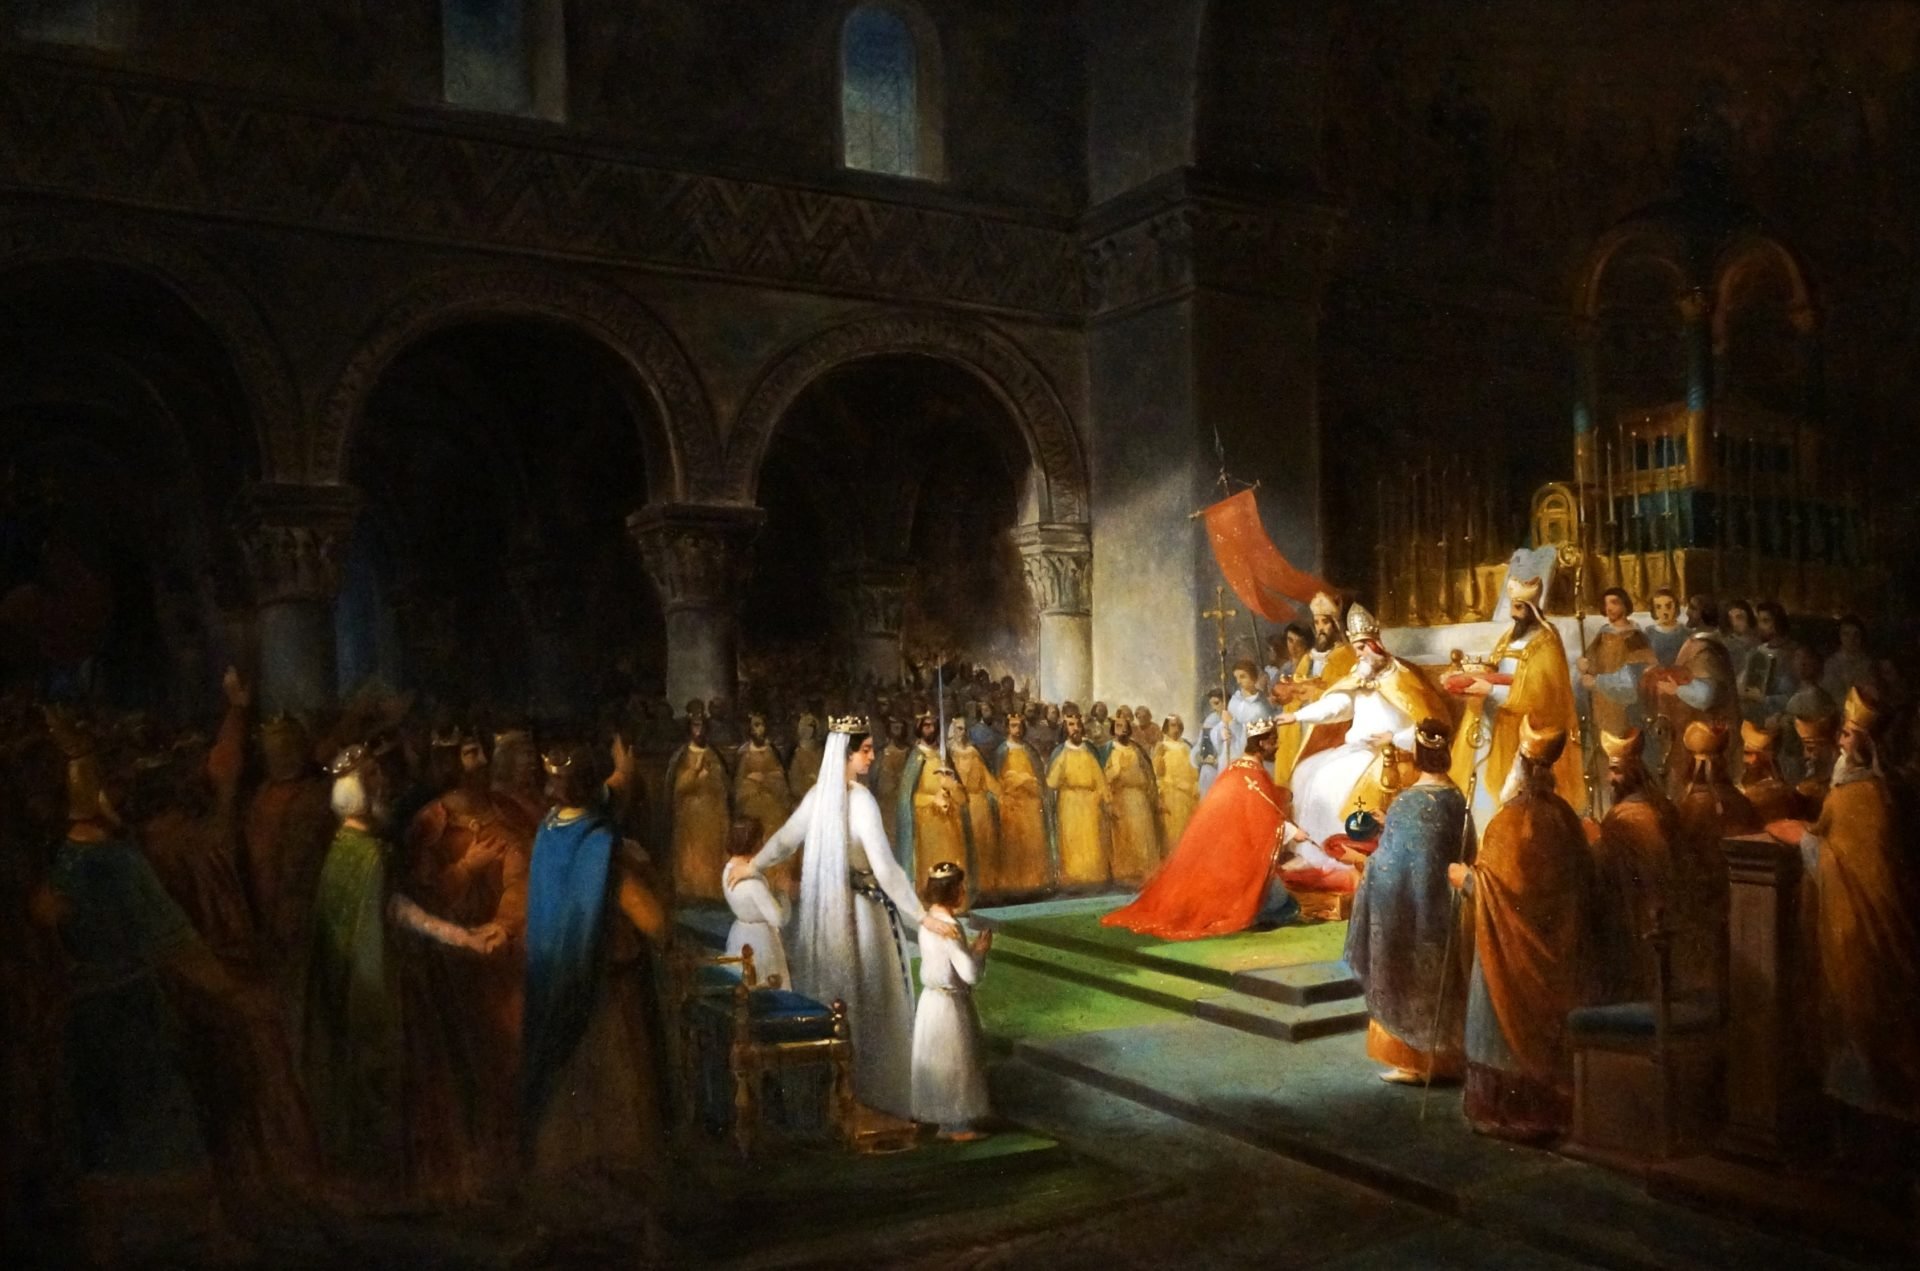 Artwork depicting the anointing ceremony of Pepin the Short at Saint-Denis on 28 July 754. Pope Stephen II crowned Pepin the Short again, anointing him, the queen, and their sons, while bestowing upon them the title of Roman patricians.